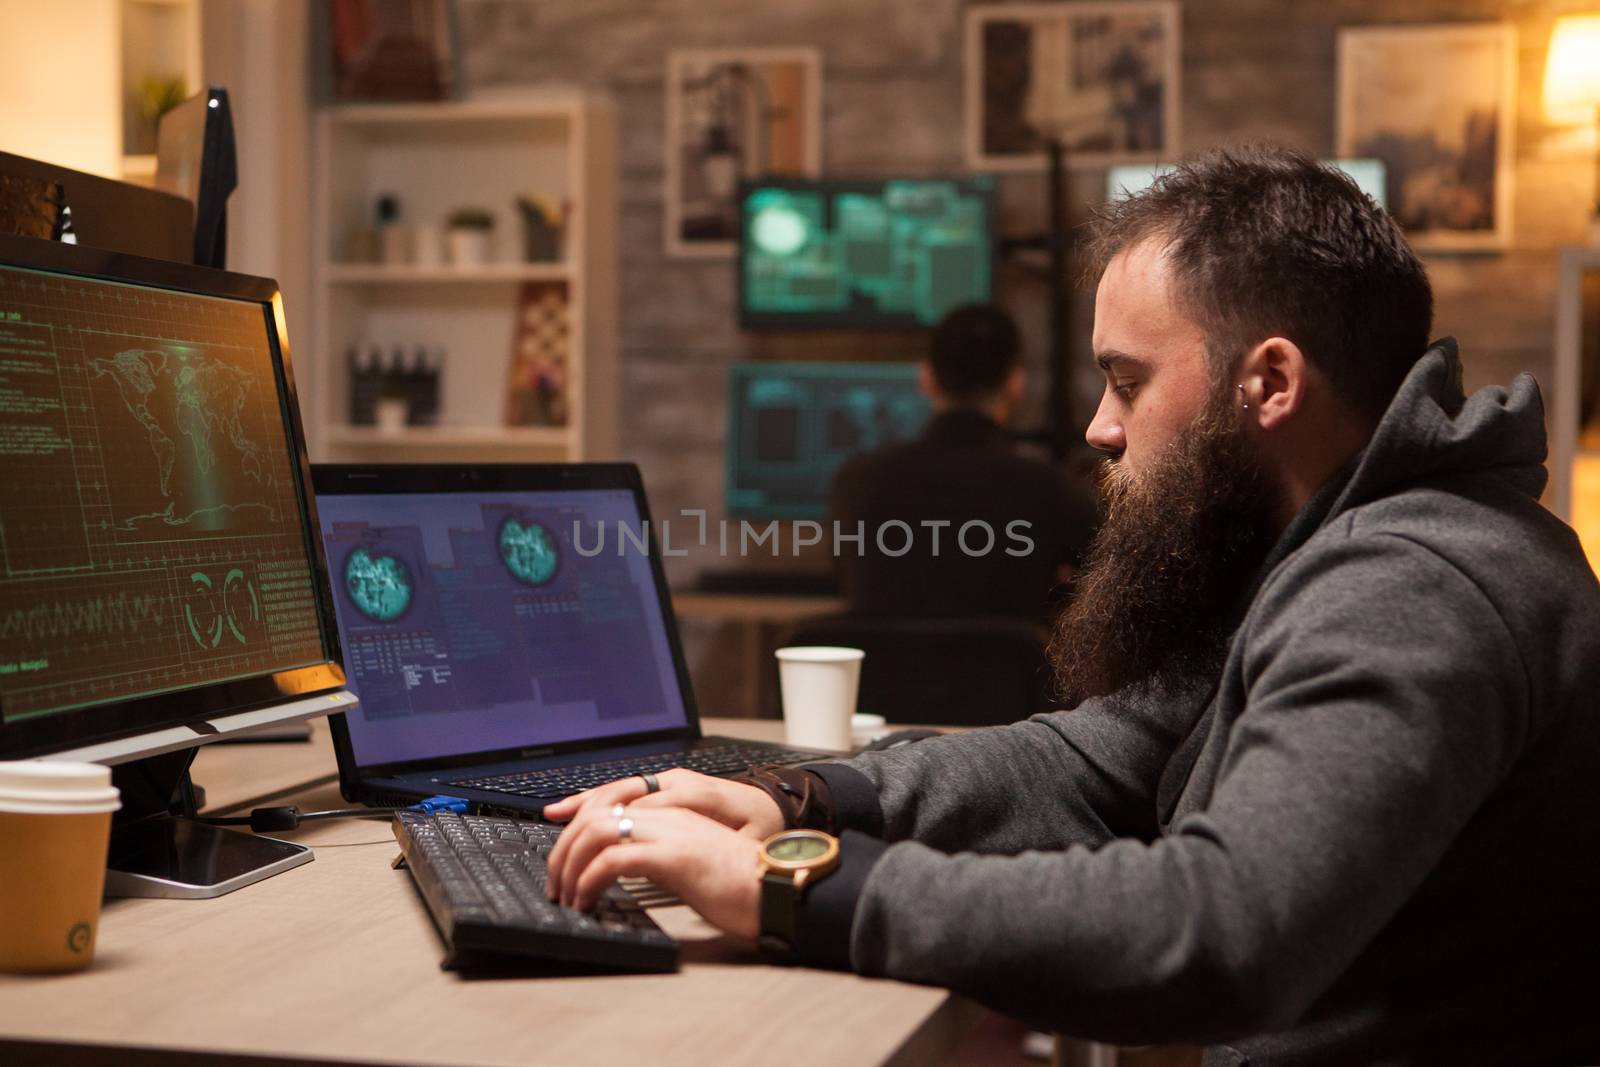 Adult hacker typing a virus on computer to break firewall security. Young hacker in the background.